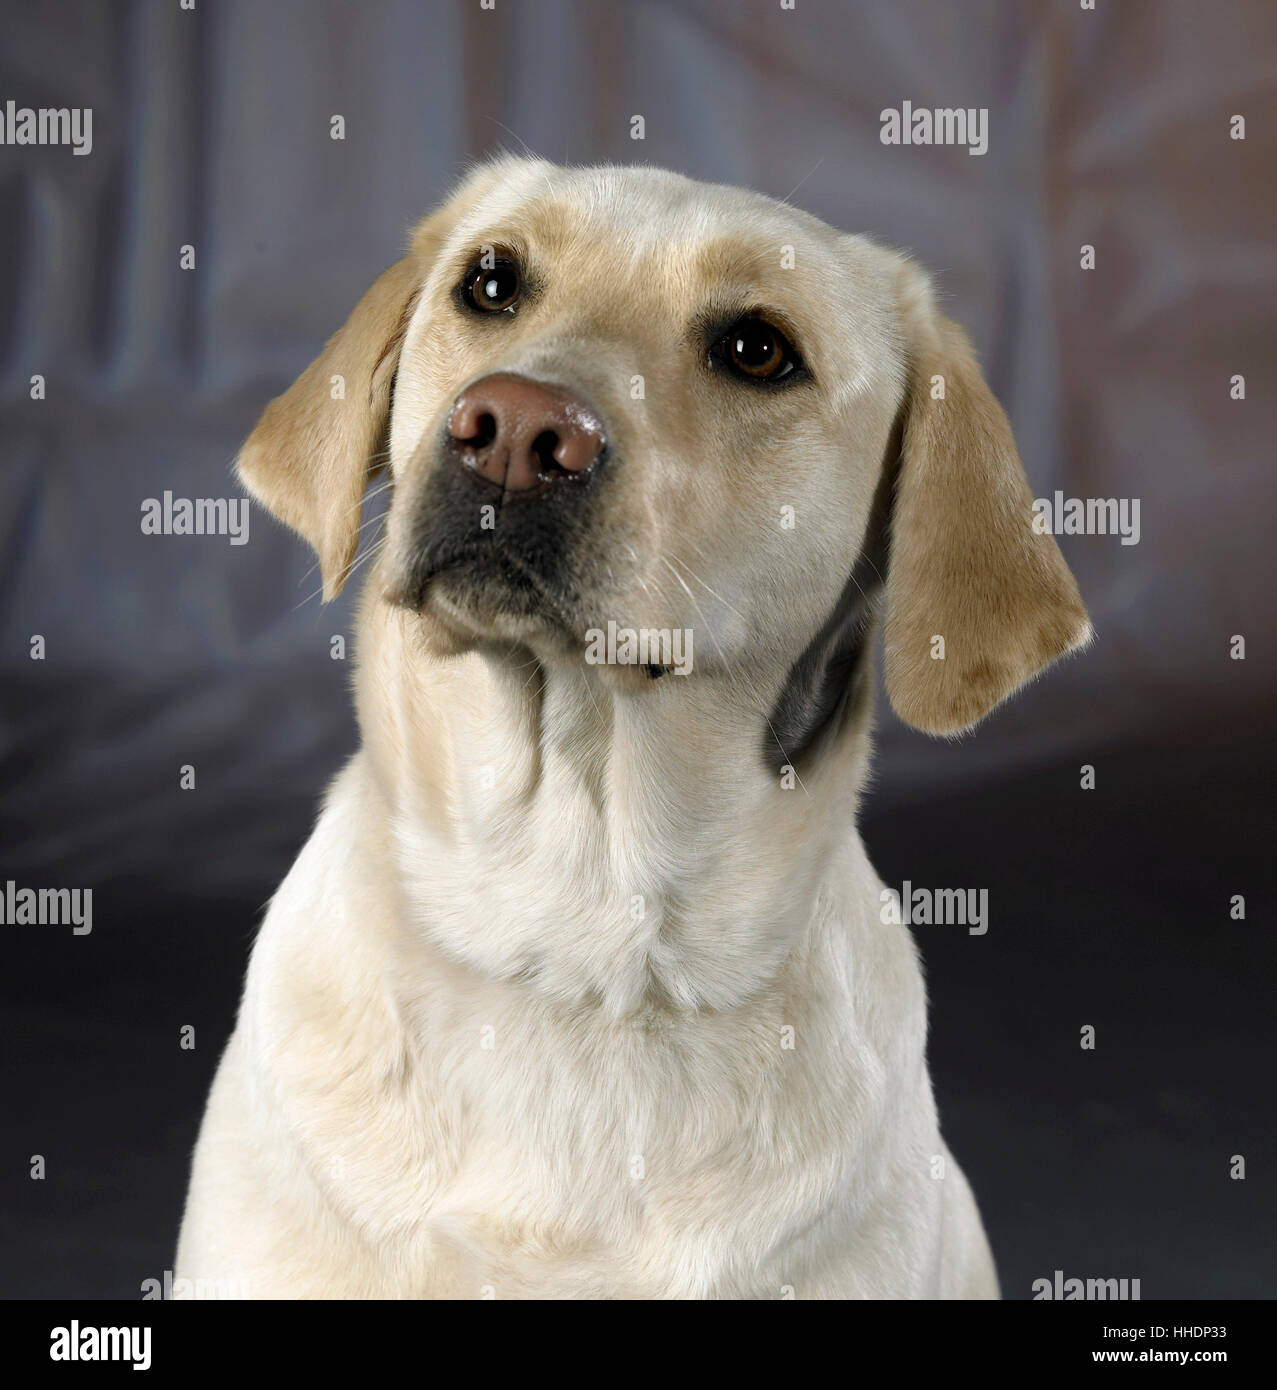 studio portrait of a light colored dog in abstract back Stock Photo